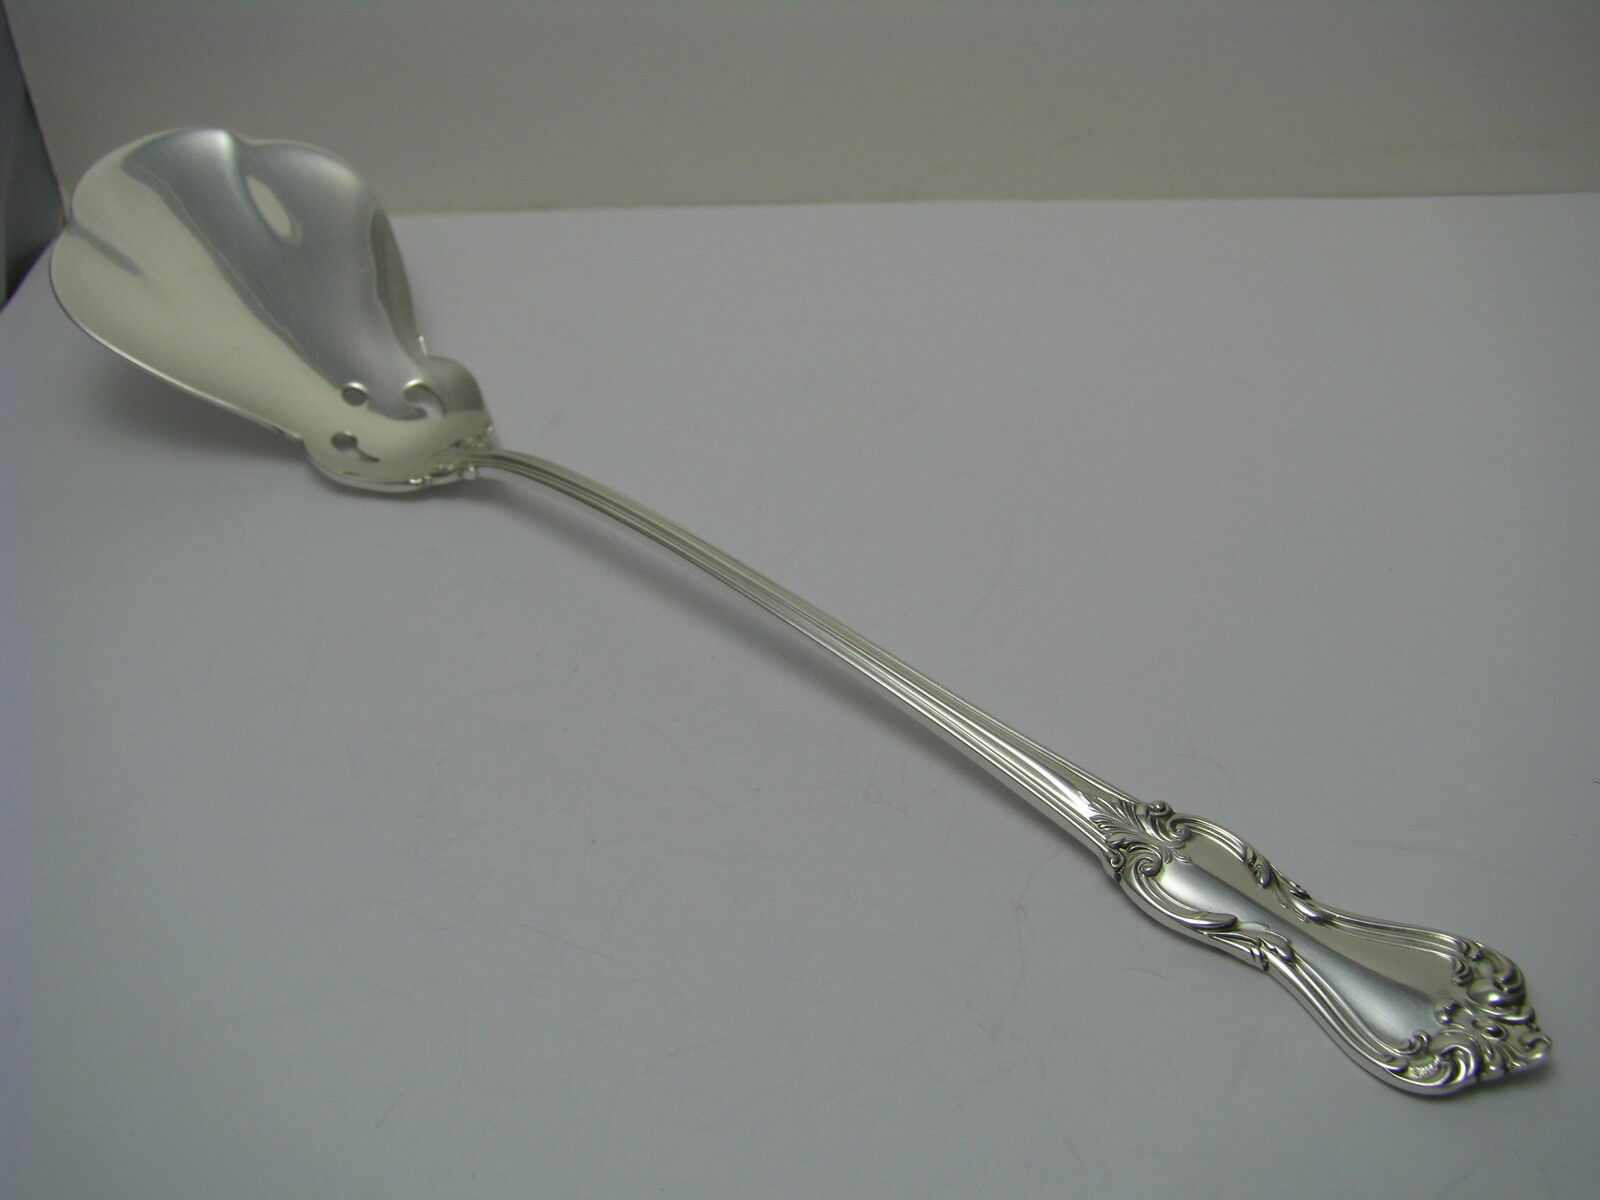 REED & BARTON STERLING SILVER SPOON SERVING Marlborough by Reed & Barton ca1950s